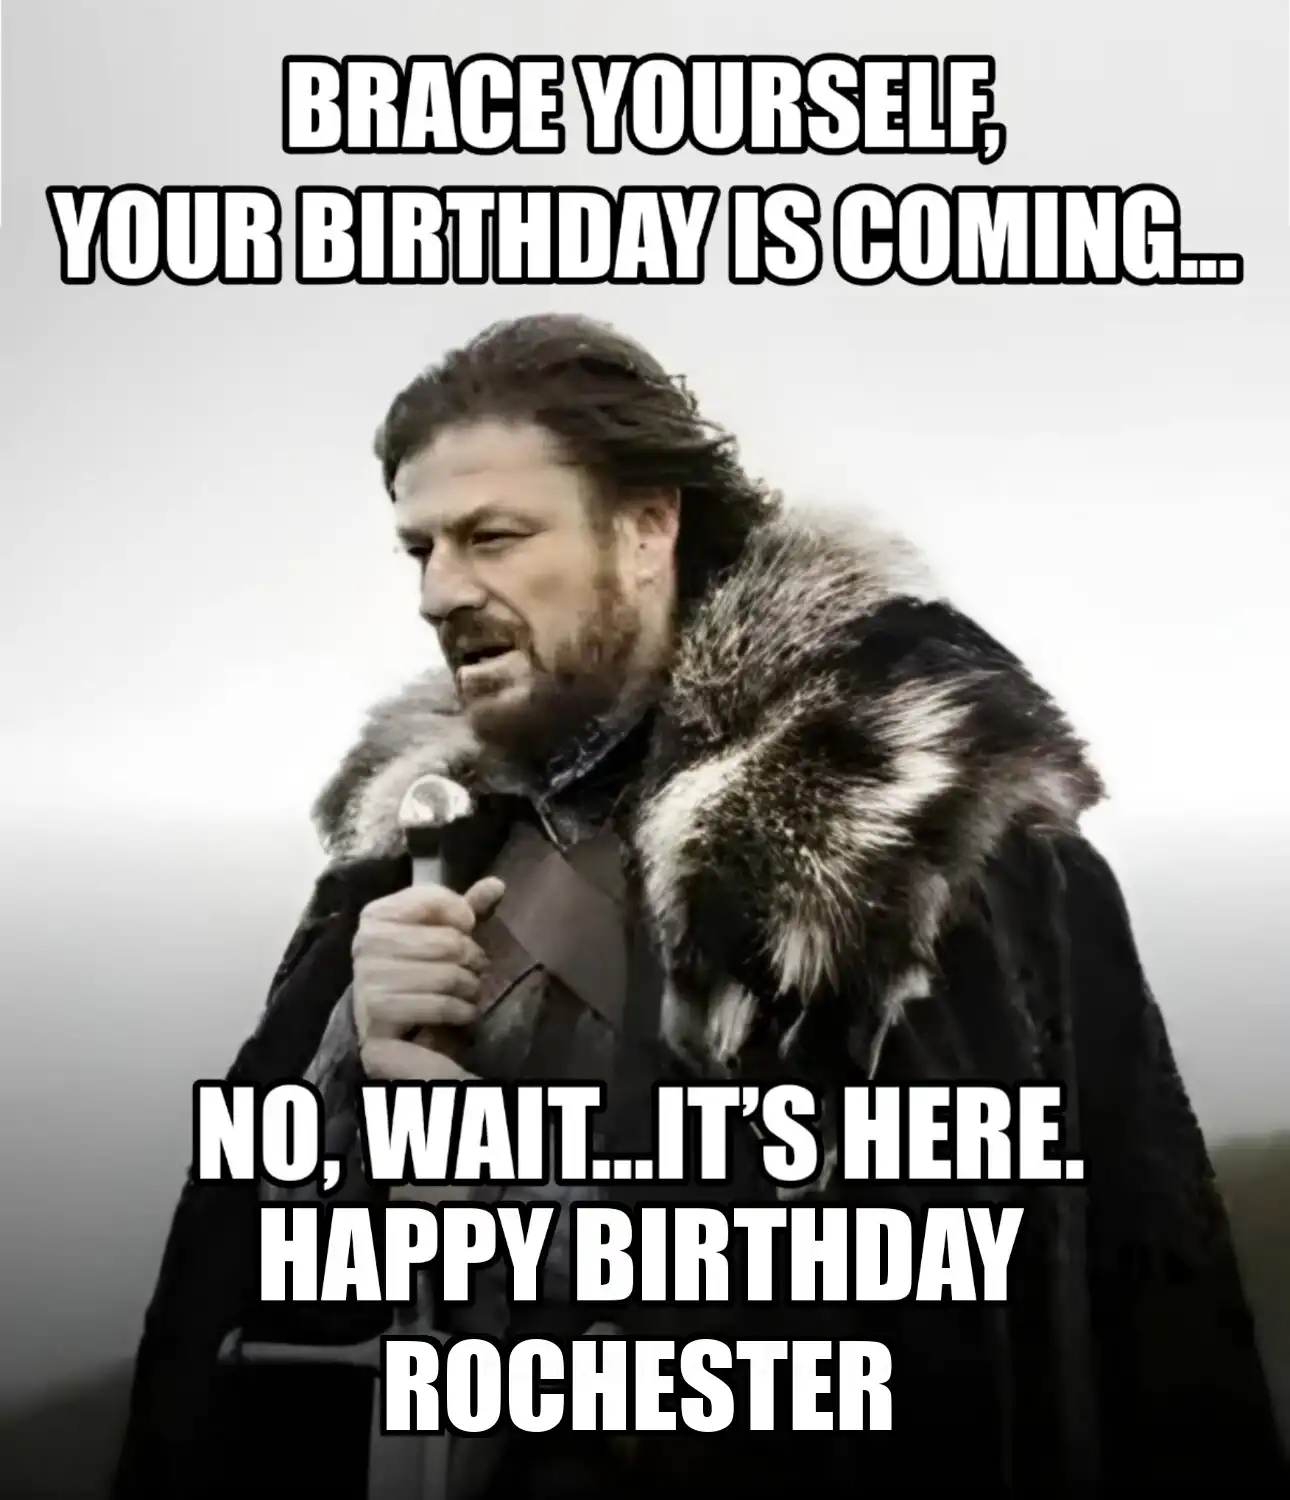 Happy Birthday Rochester Brace Yourself Your Birthday Is Coming Meme